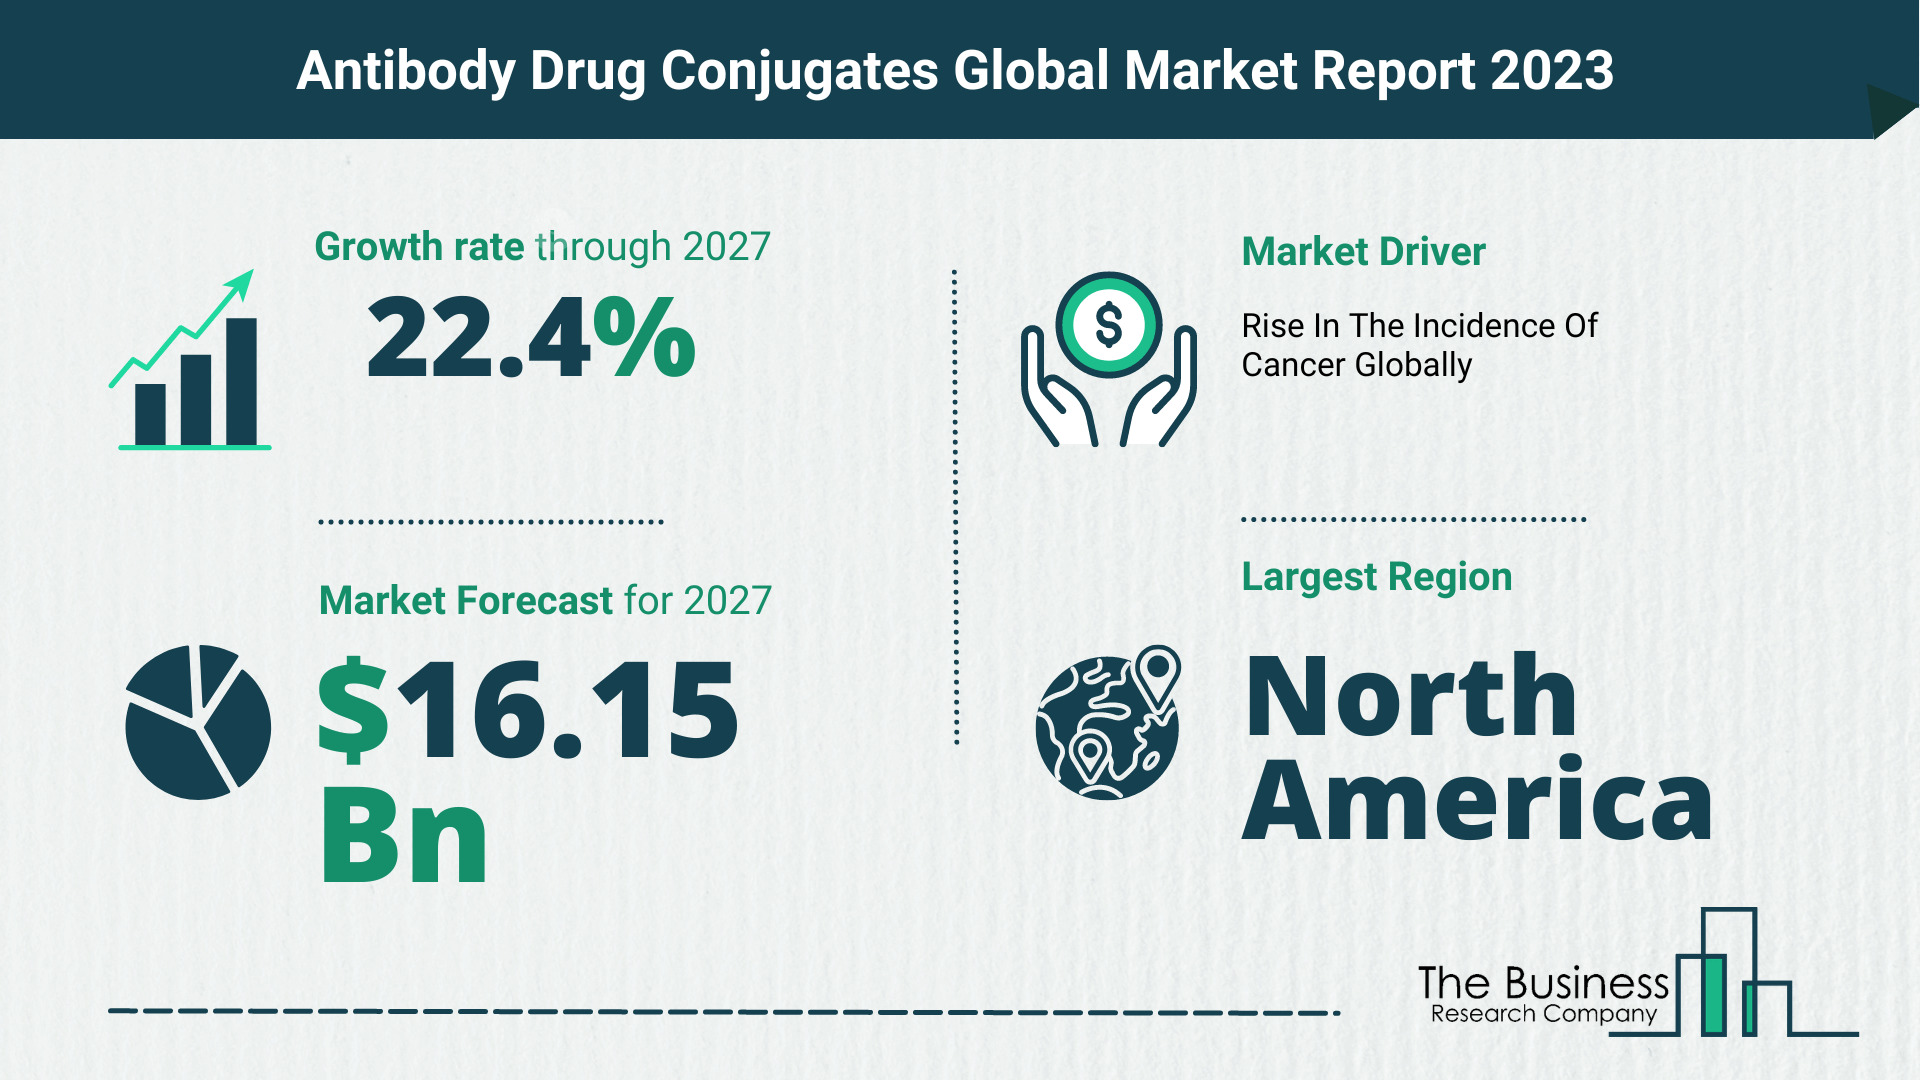 Antibody Drug Conjugates Market Size, Share, And Growth Rate Analysis 2023